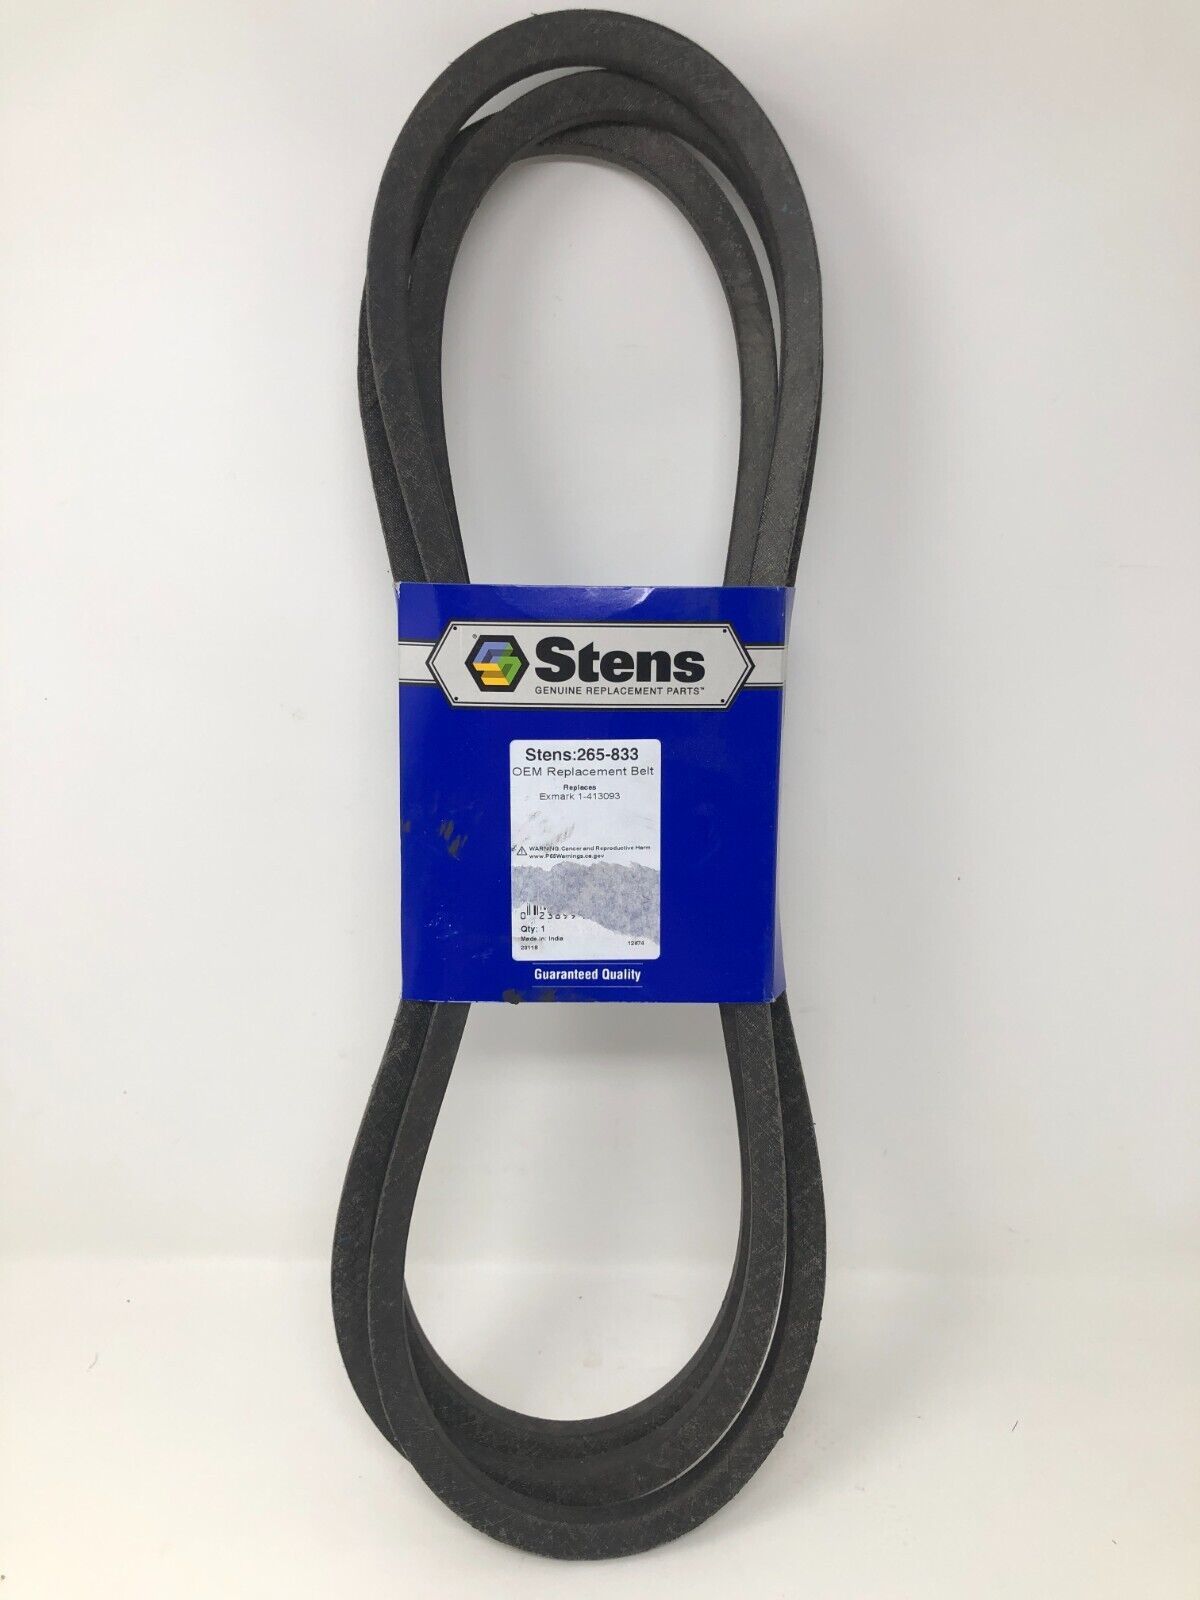 Primary image for 265-833 Stens OEM Replacement Belt / Exmark 1-413093